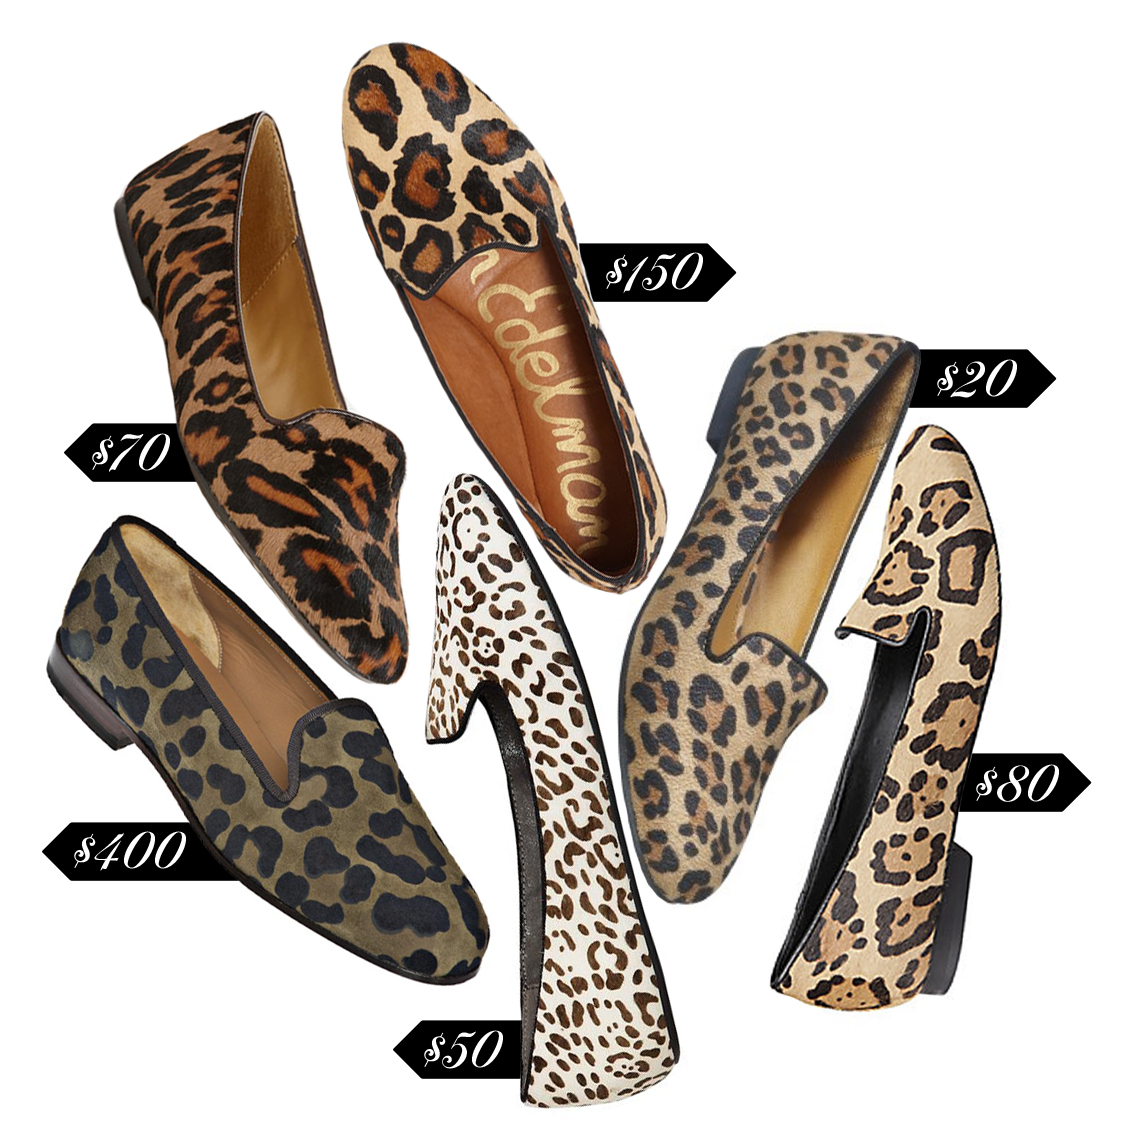 Southern Curls & Pearls: Fall Trend: Leopard Loafers